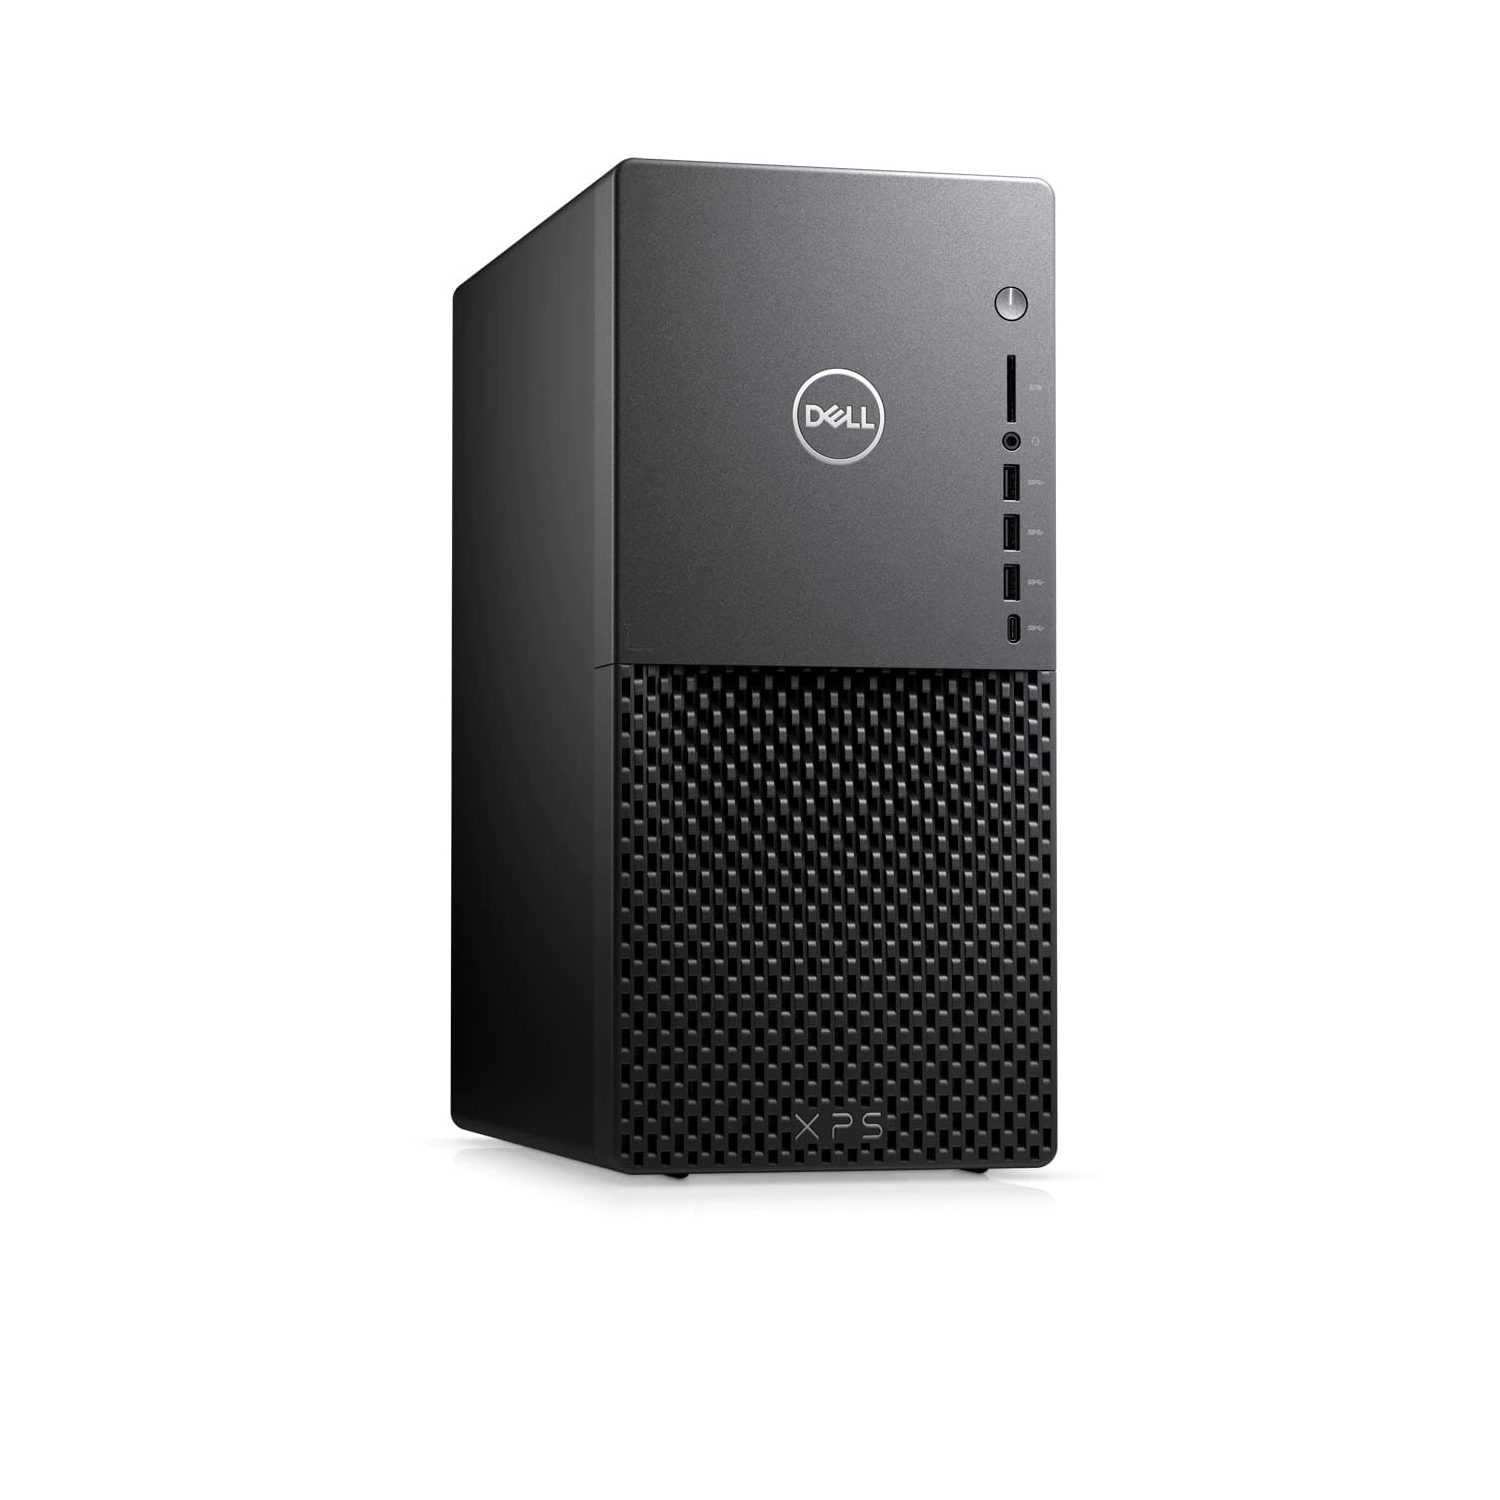 Refurbished (Excellent) - Dell XPS 8940 Desktop (2020) | Core i7 - 2TB HDD + 512GB SSD - 32GB RAM - RTX 2060 | 8 Cores @ 4.8 GHz - 10th Gen CPU Certified Refurbished